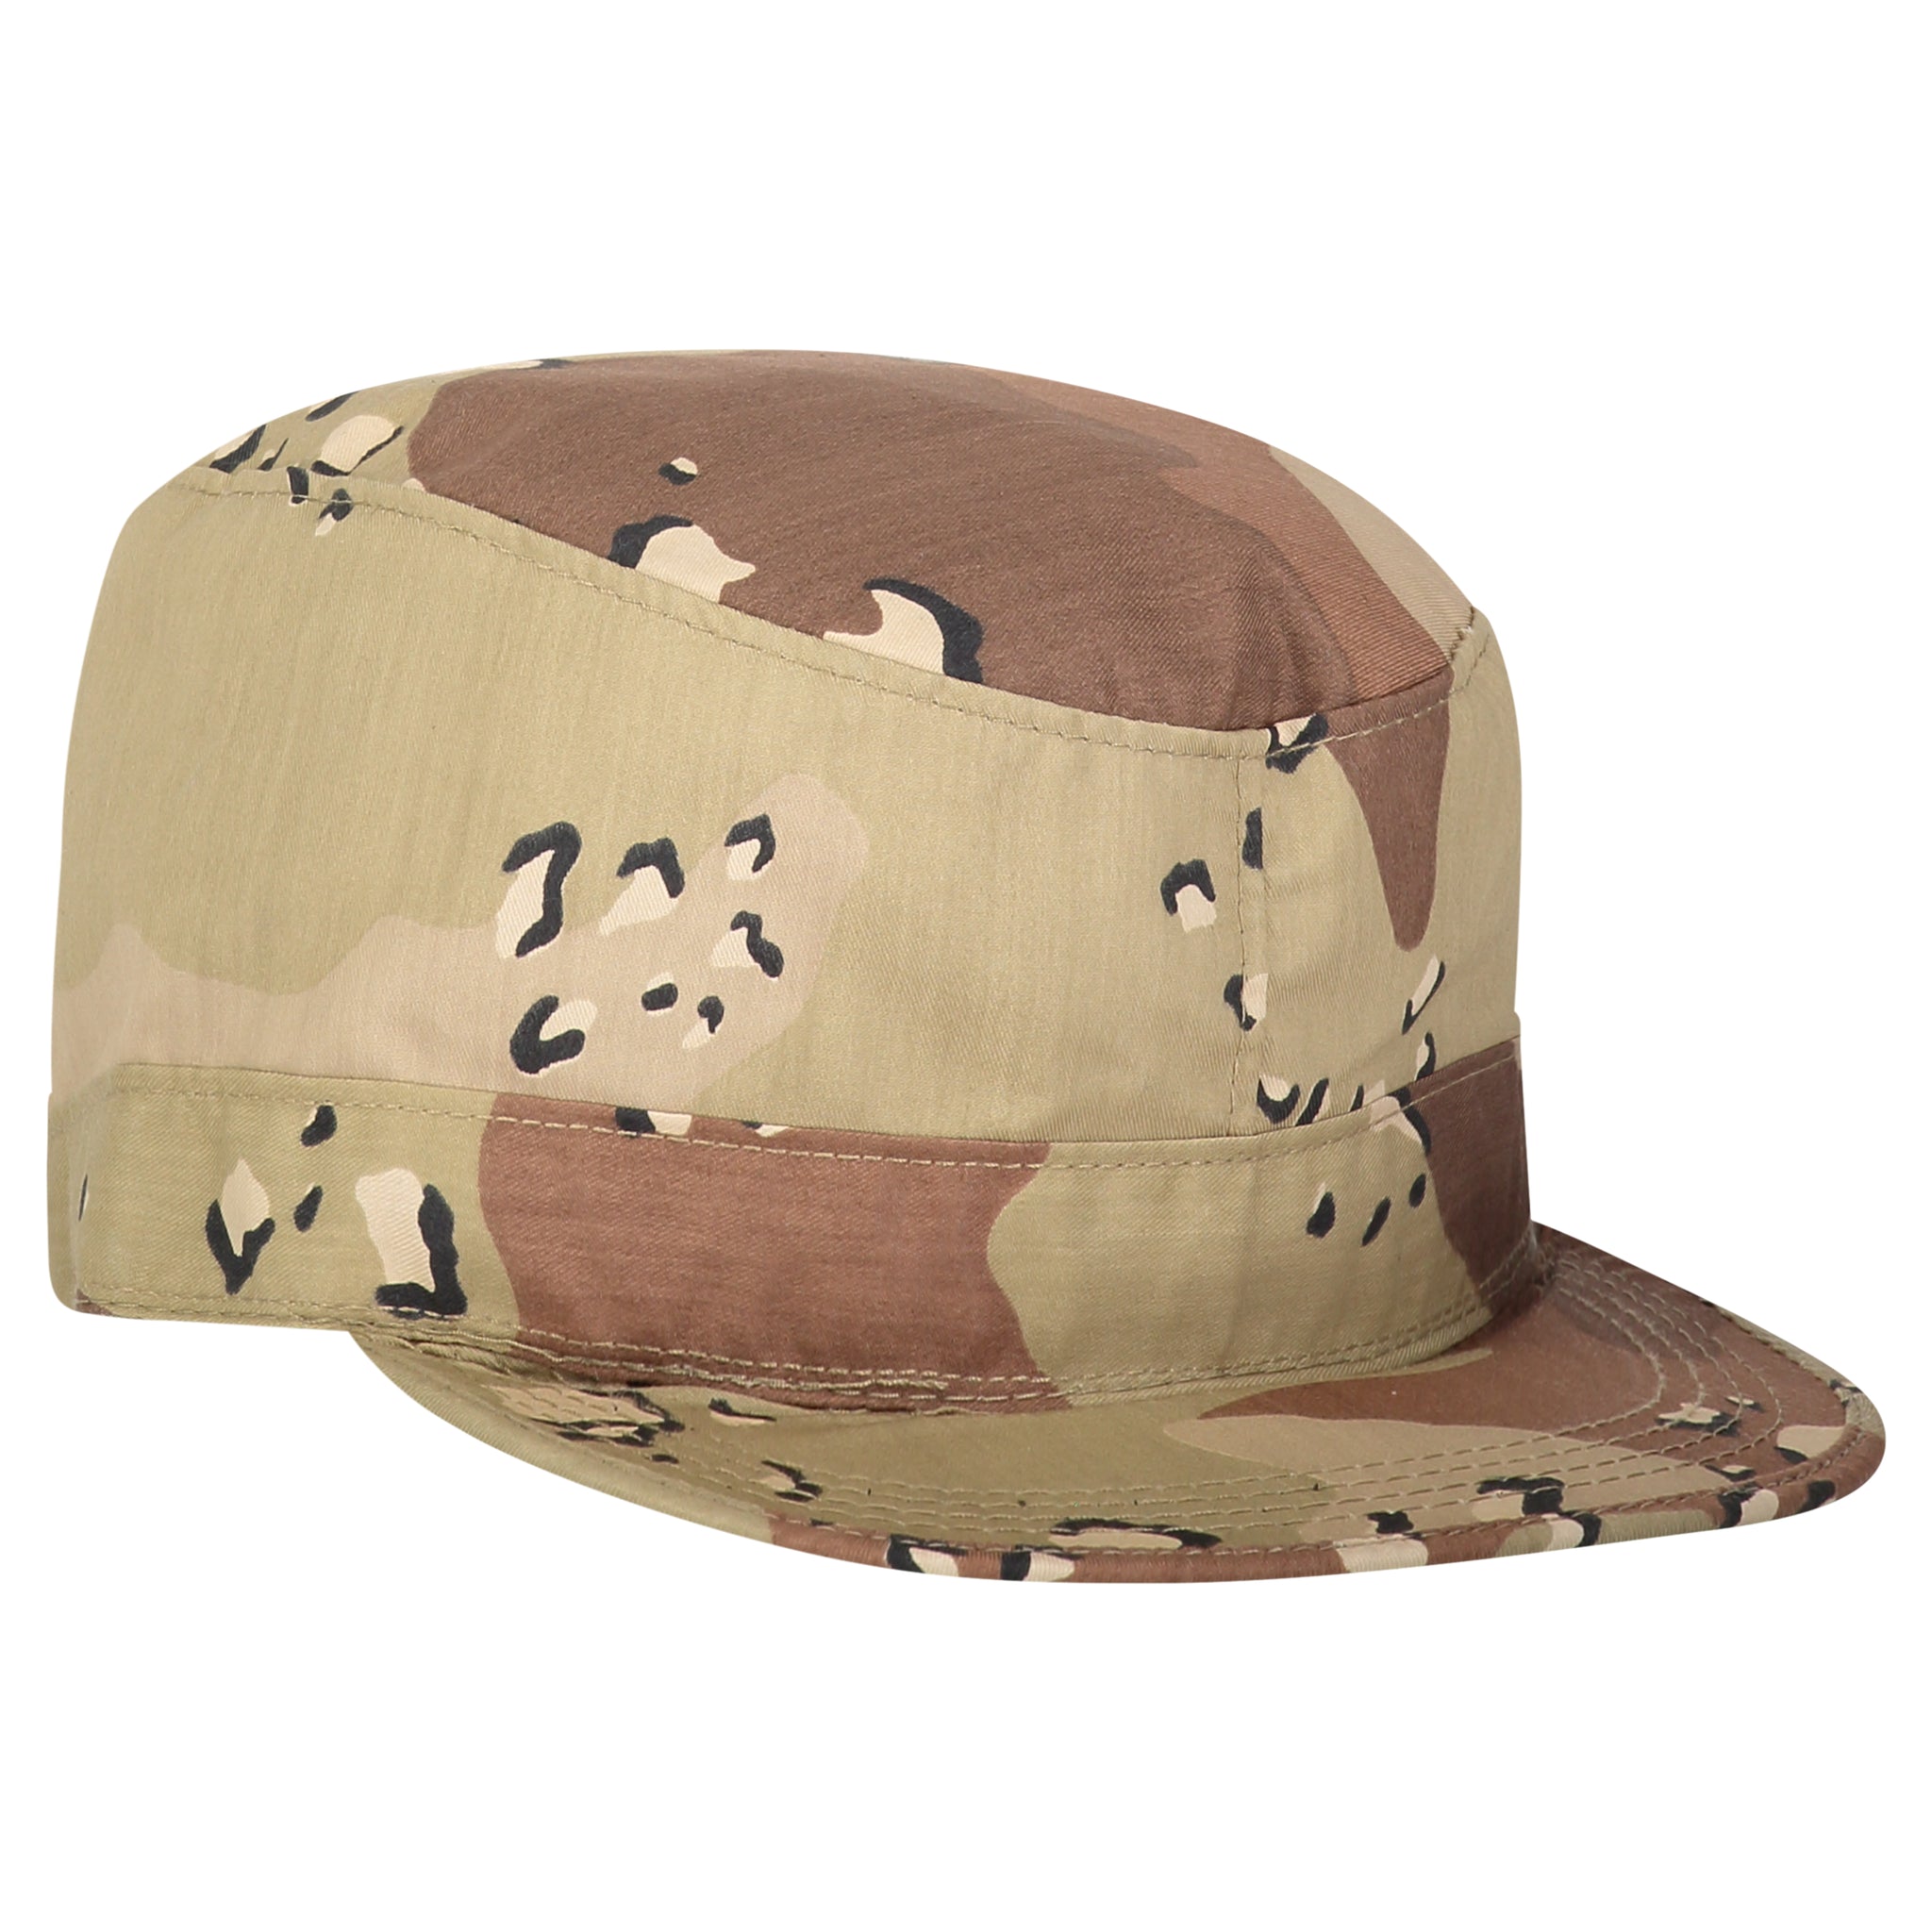 Military Style Combat Cap – McGuire Navy Army